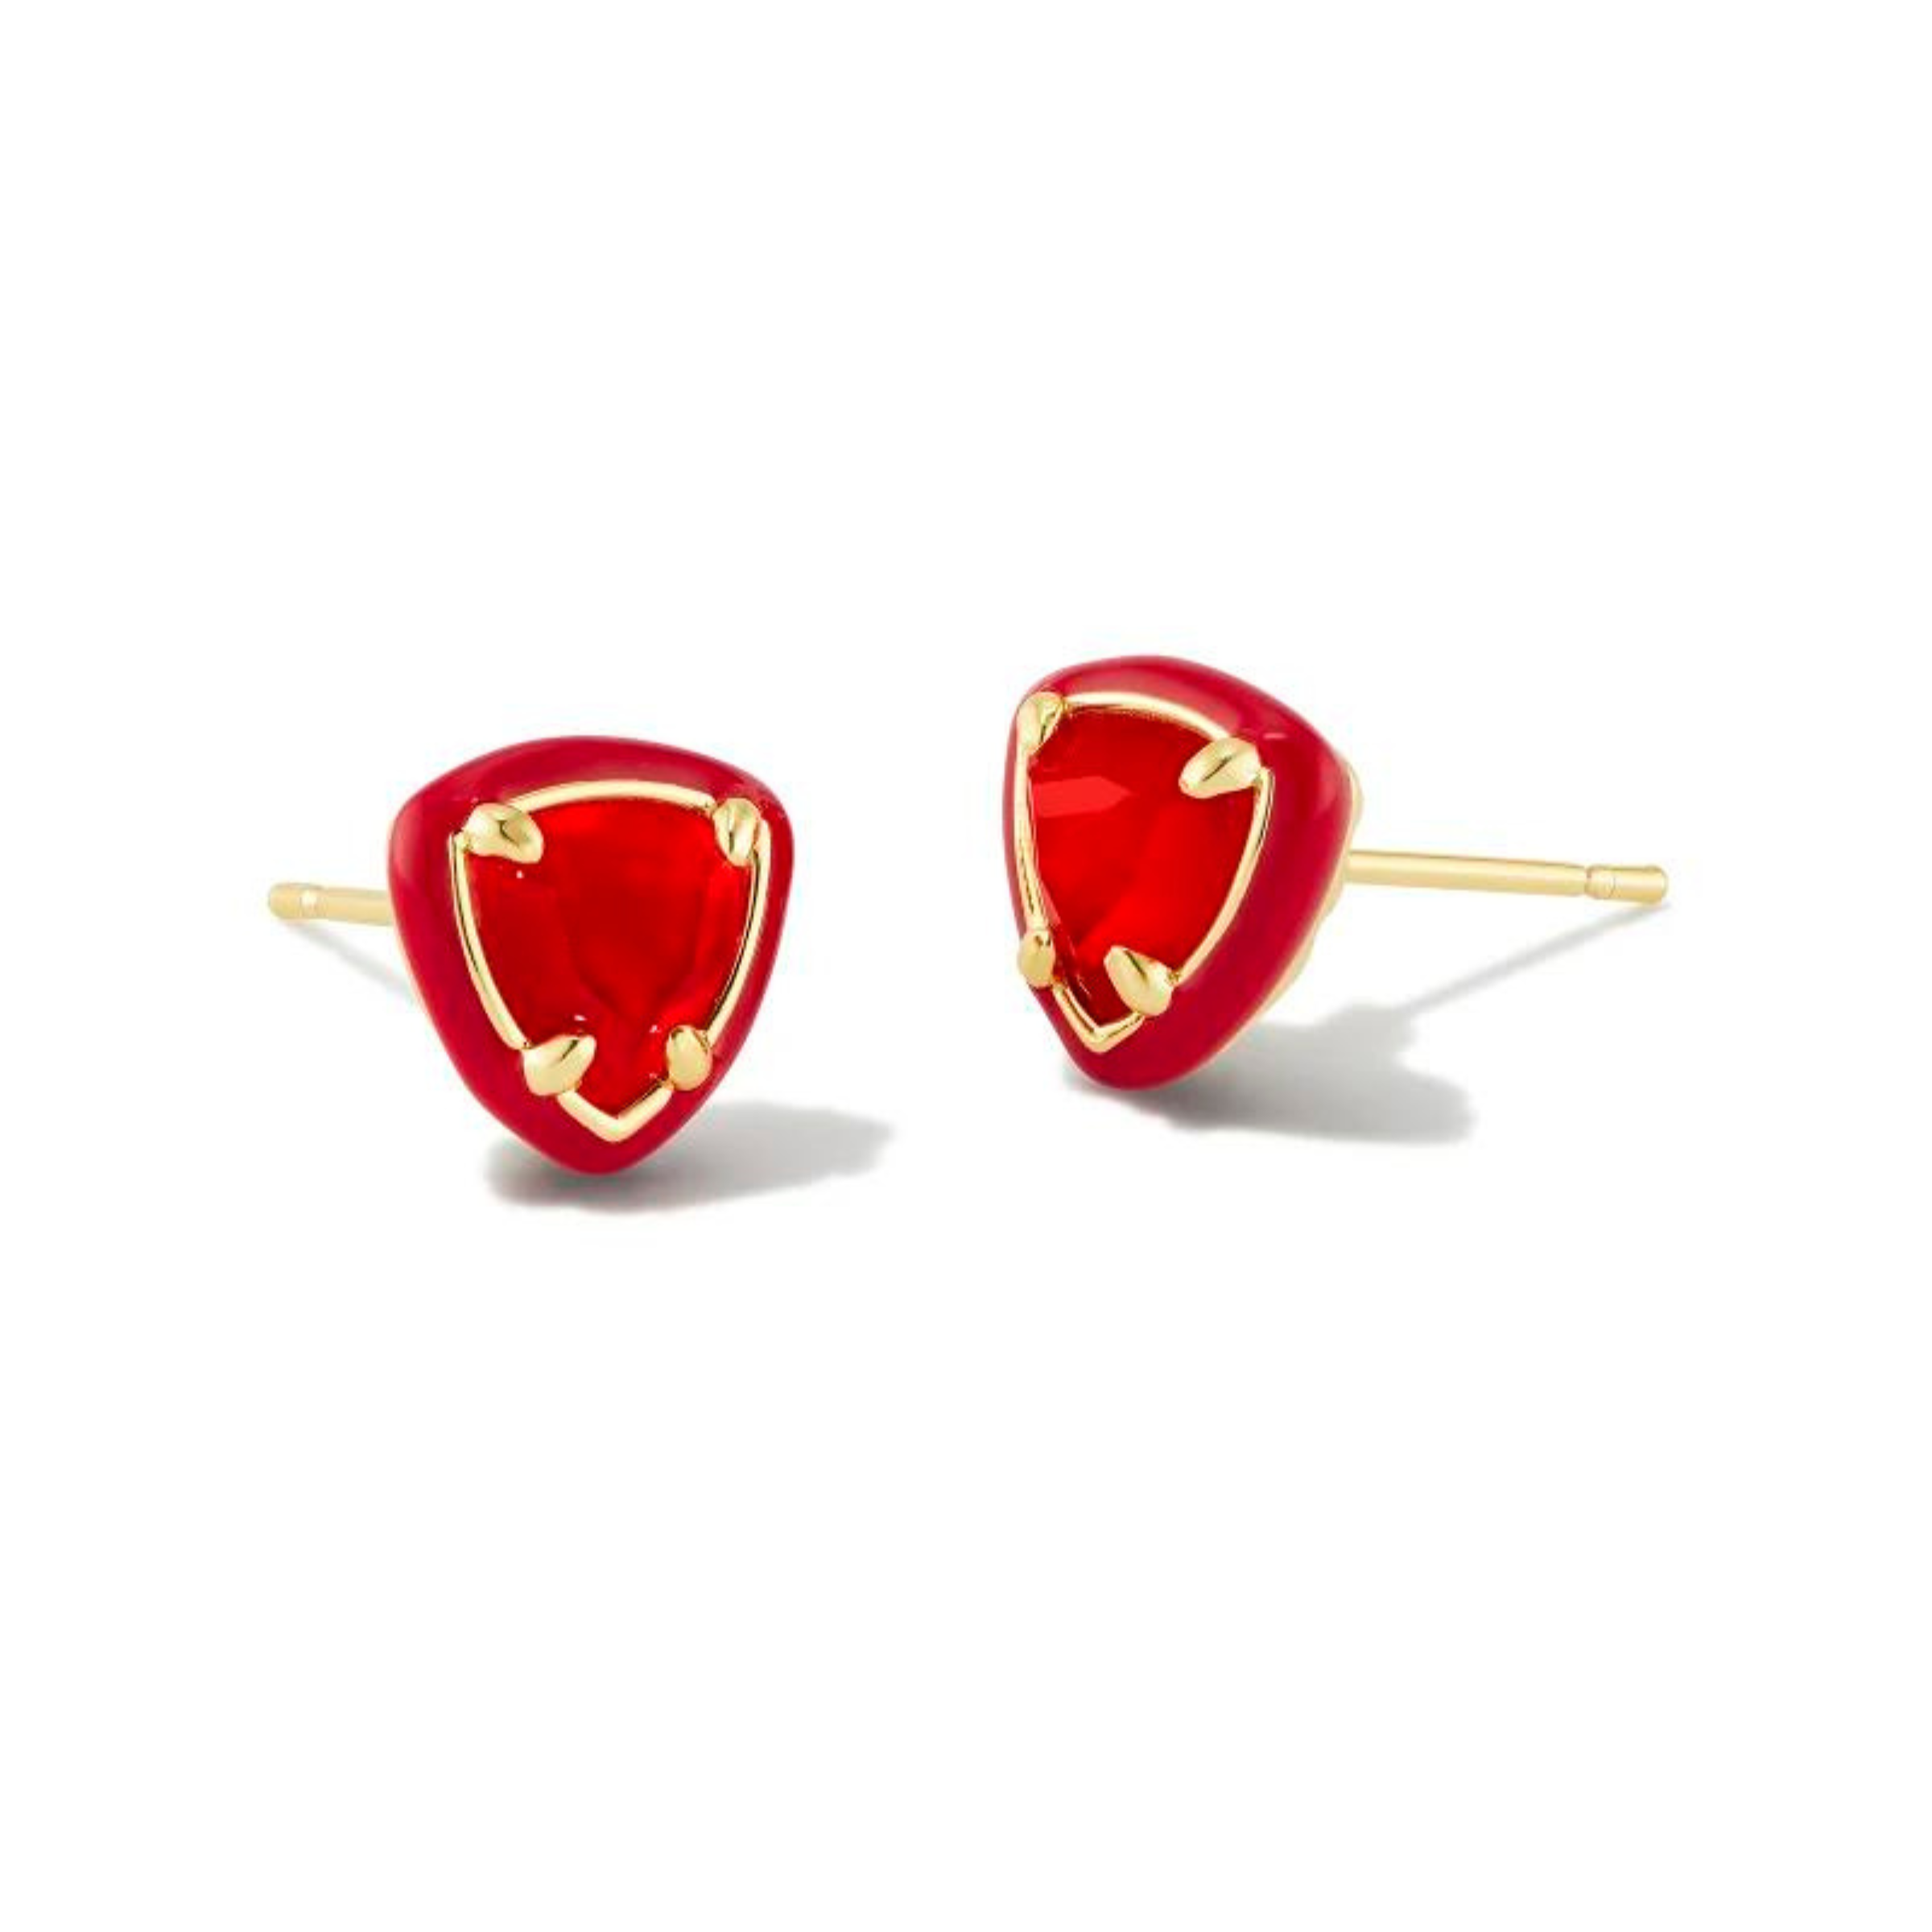 Kendra Scott | Arden Gold Enamel Framed Stud Earrings in Red Illusion - Giddy Up Glamour Boutique